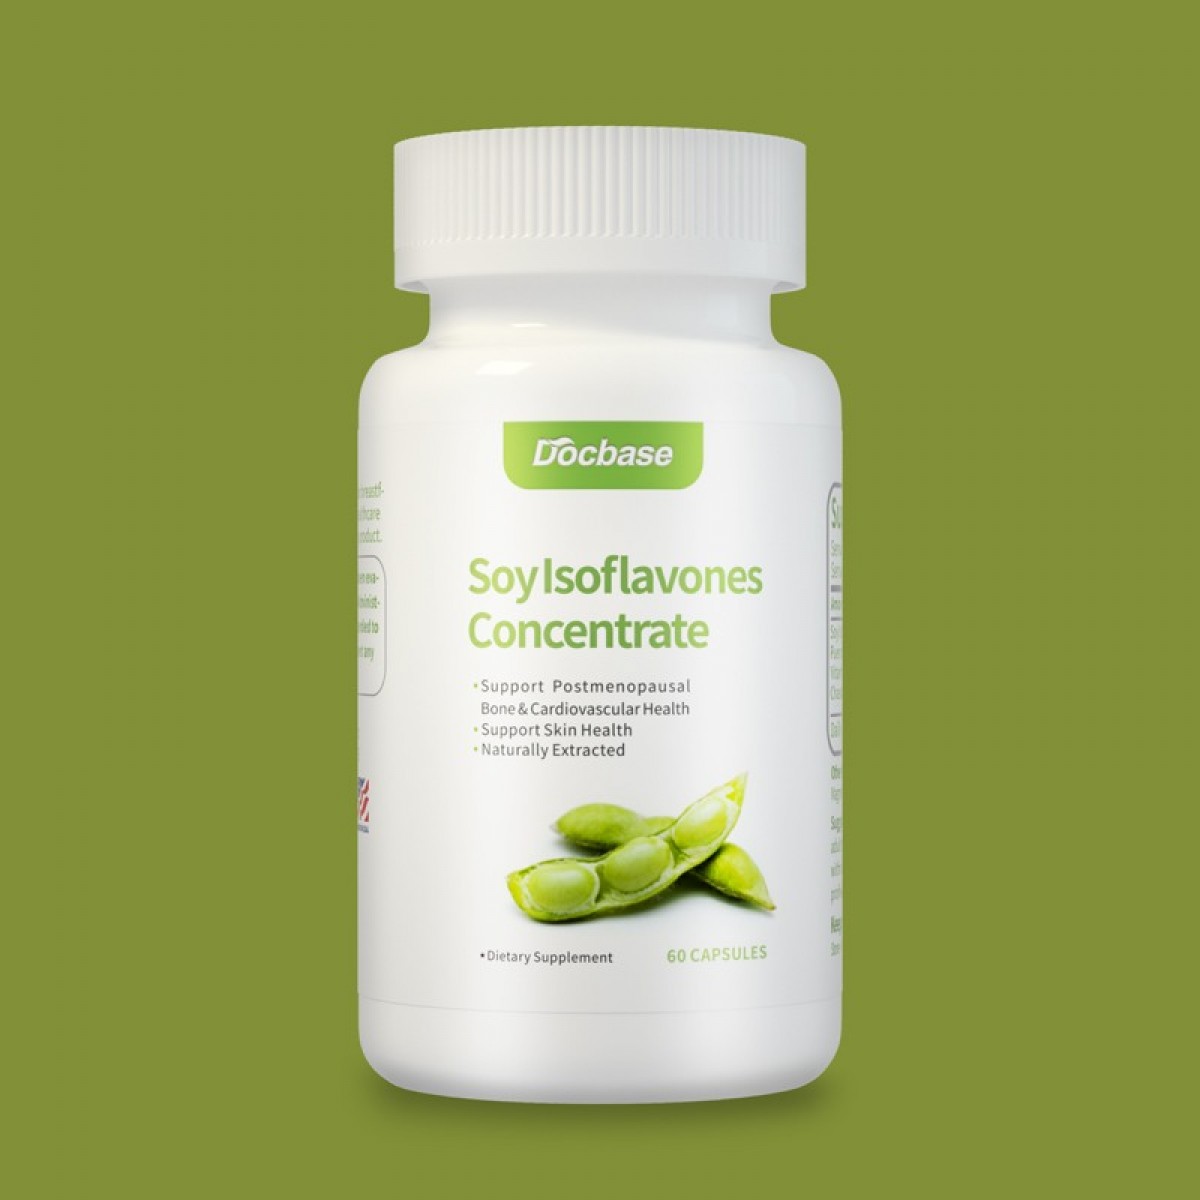 Docbase |Soylsoflavones Concentrate｜Soybean isoflavone capsules Help supplement phytoestrogens Balan